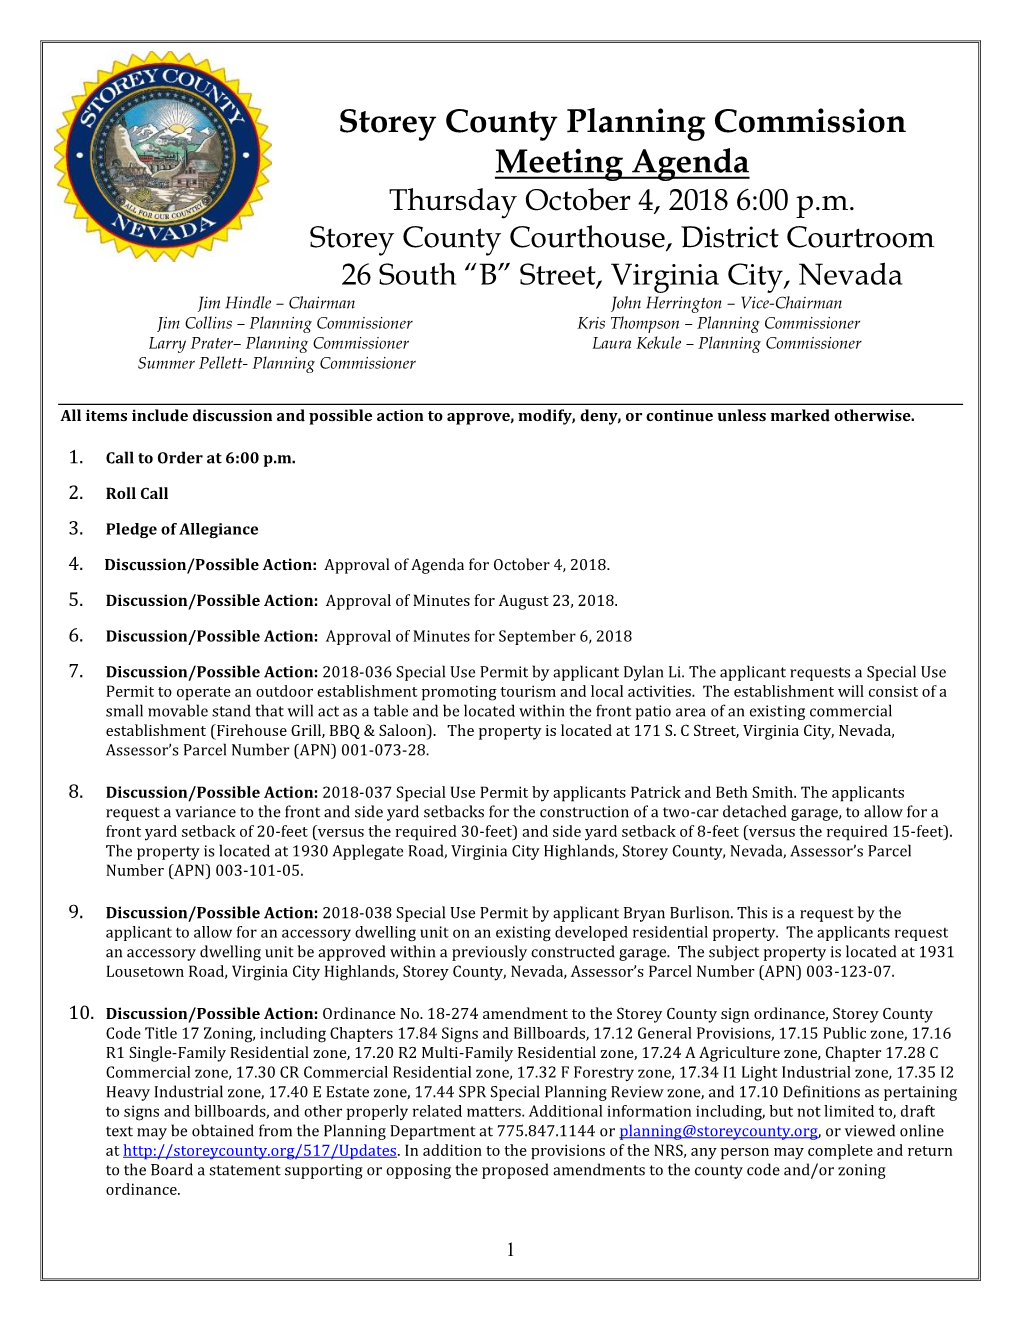 Storey County Planning Commission Meeting Agenda Thursday October 4, 2018 6:00 P.M